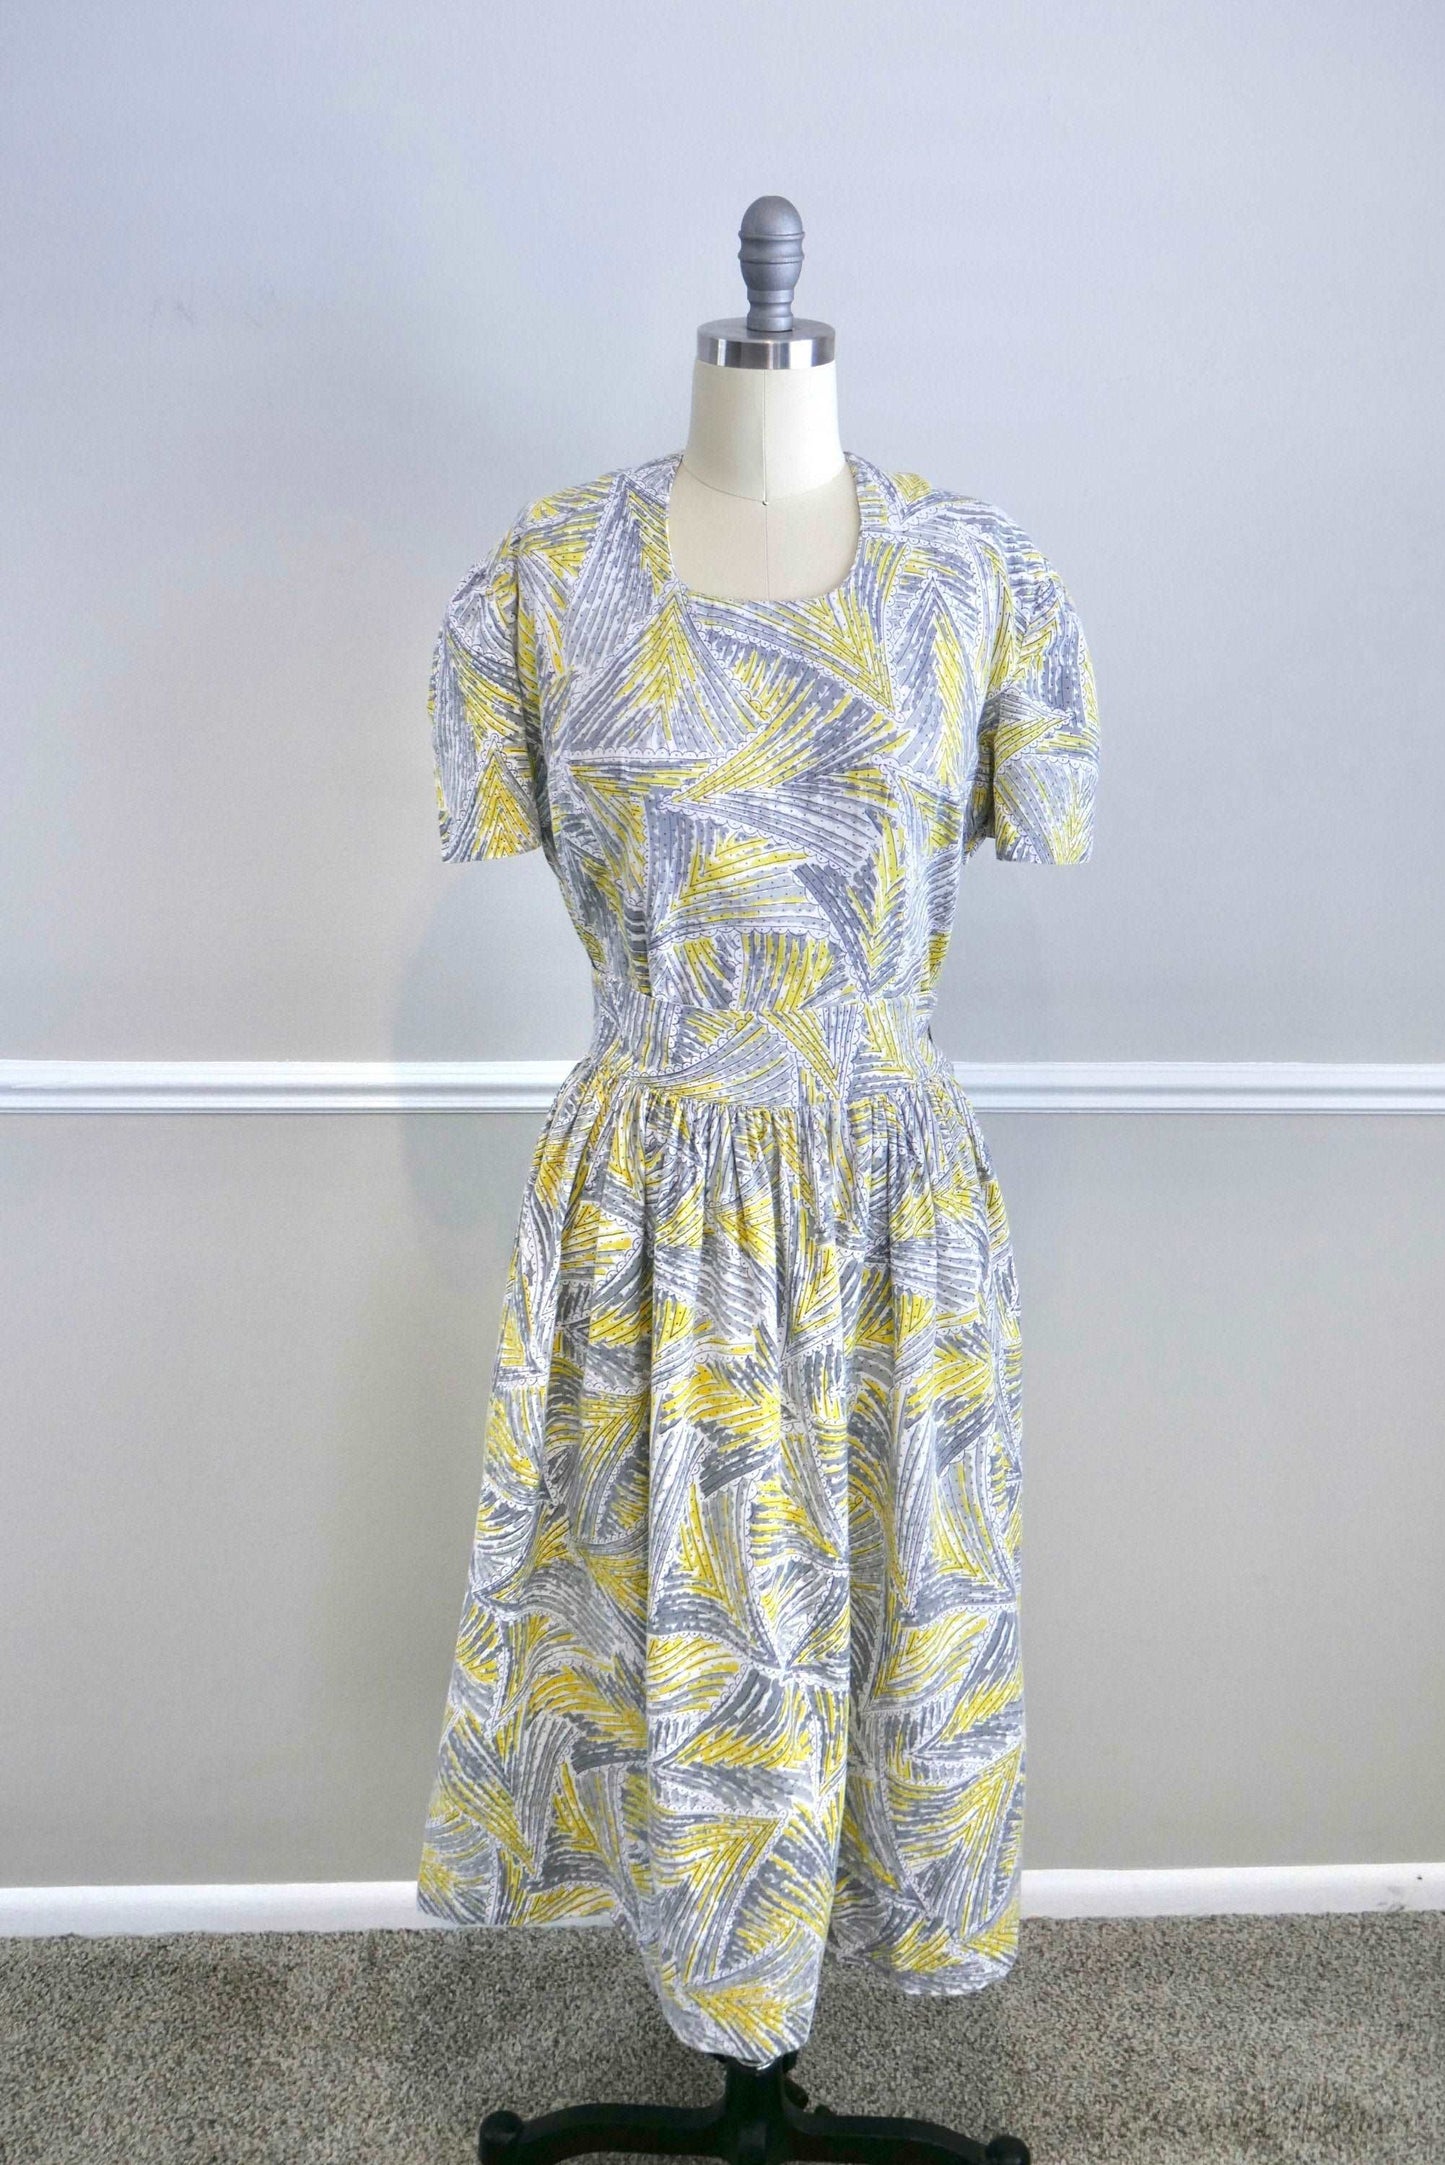 ON SALE Vintage 1940s Novelty Print Puff Sleeve Blouse and Skirt Set / 40s retro cotton full skirt top shirt size S